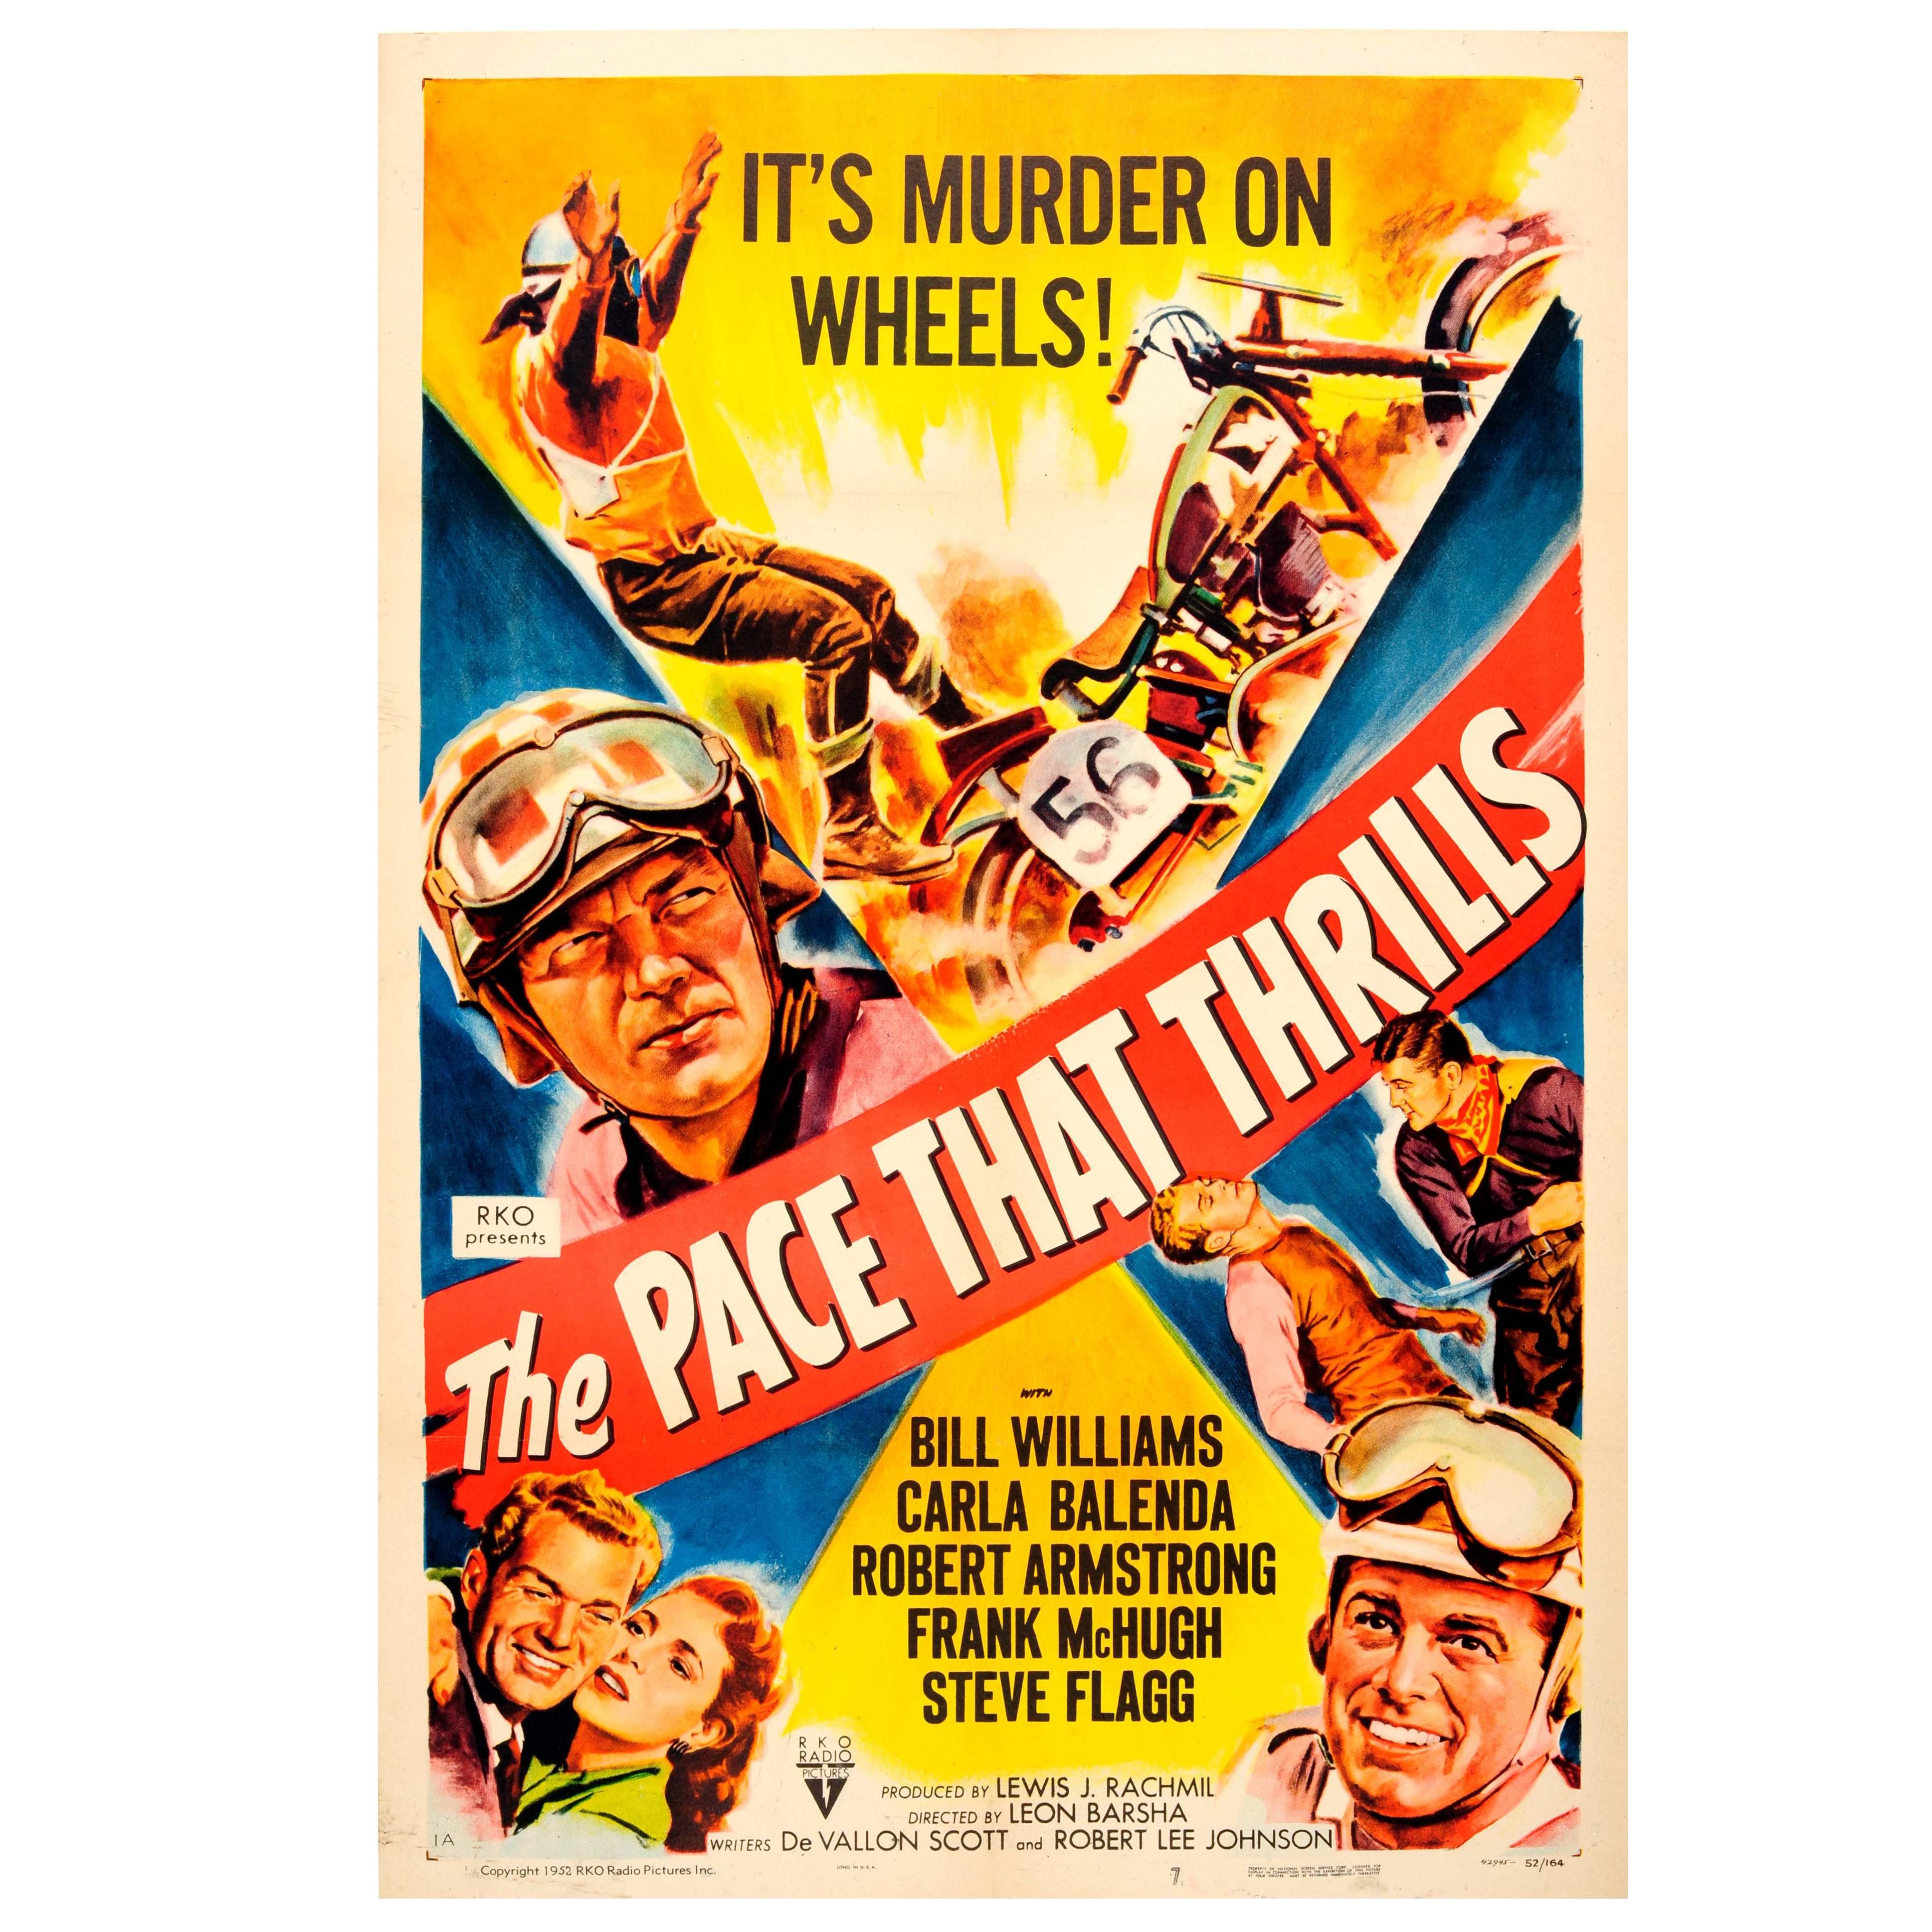 Vintage Movie Poster for a Motorcycle Racing Film “The Pace That Thrills”